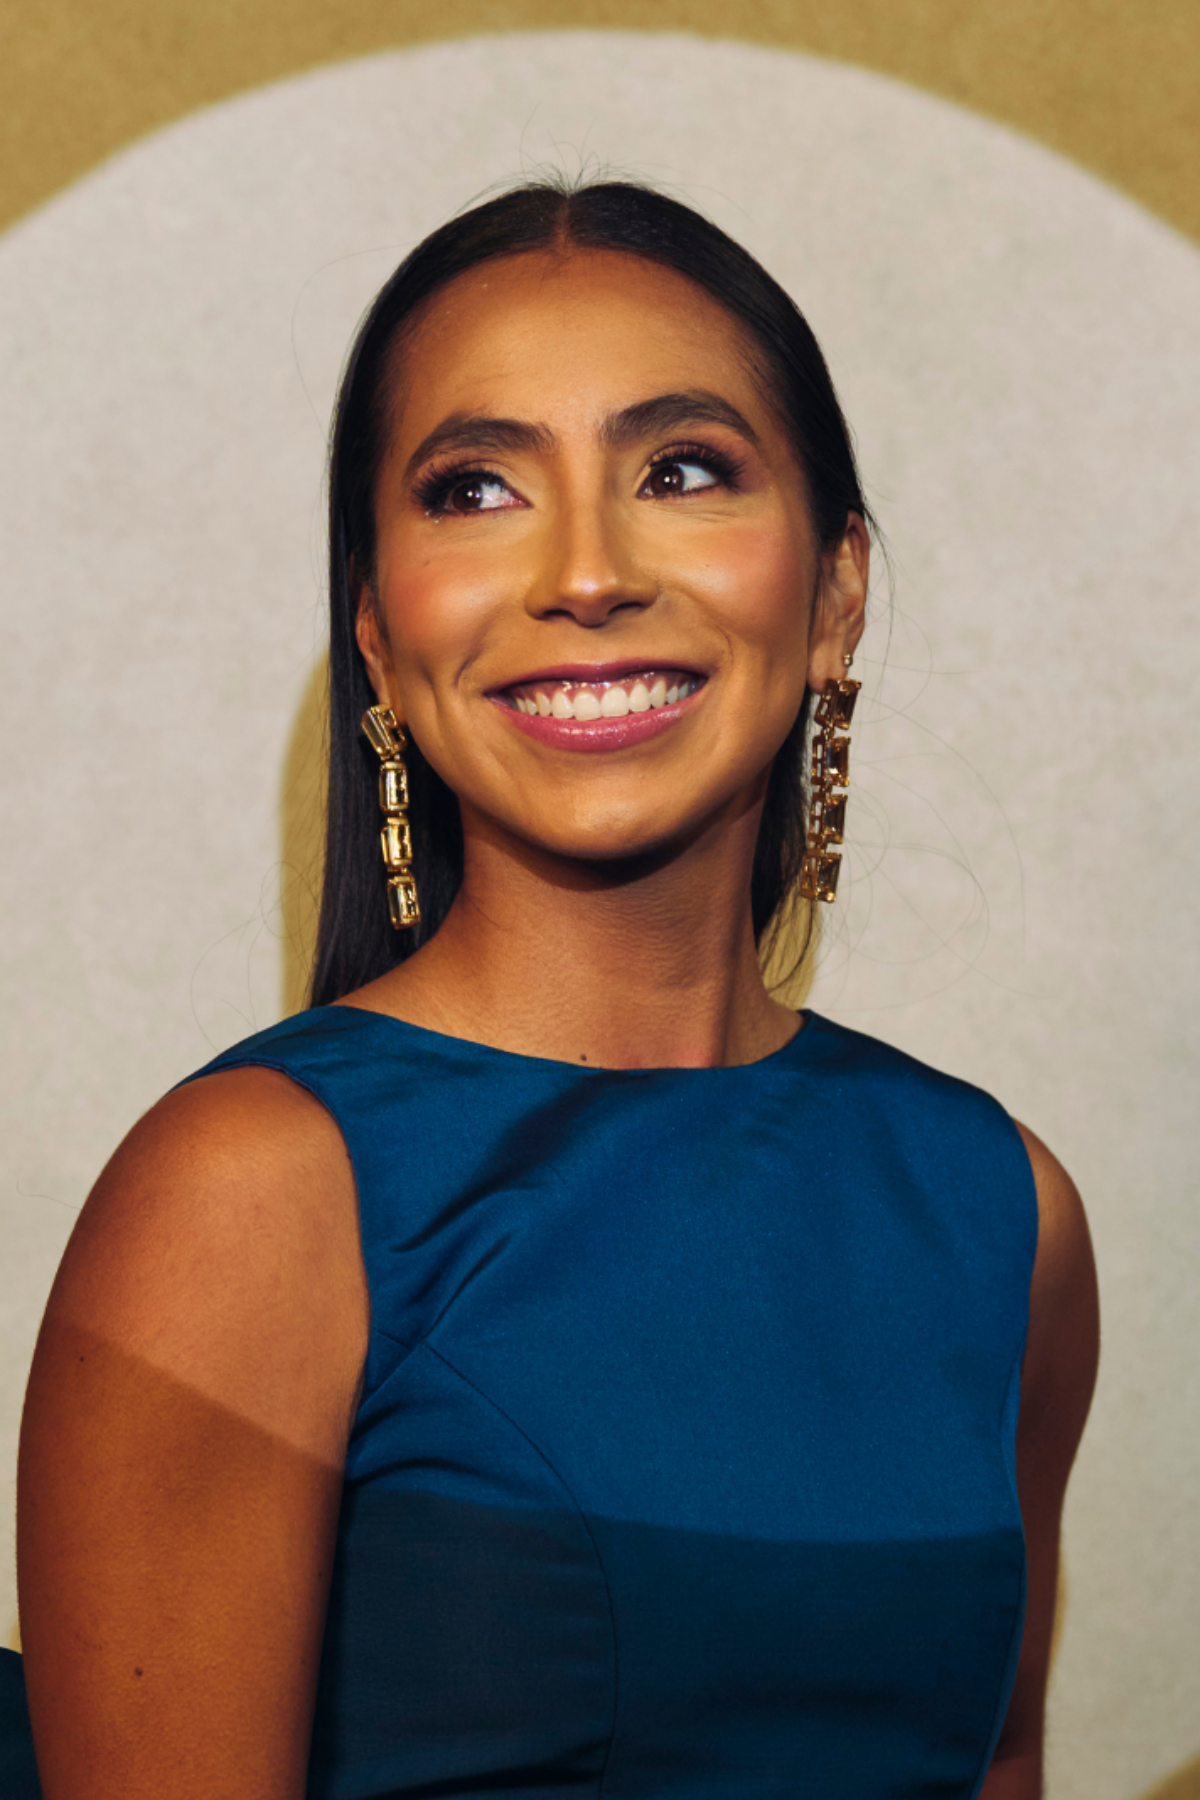 PHOENIX, AZ - FEBRUARY 09: Diana Flores poses for a photo during NFL Honors at the Symphony Hall on February 9, 2023 in Phoenix, Arizona. (Photo by Cooper Neill/Getty Images)